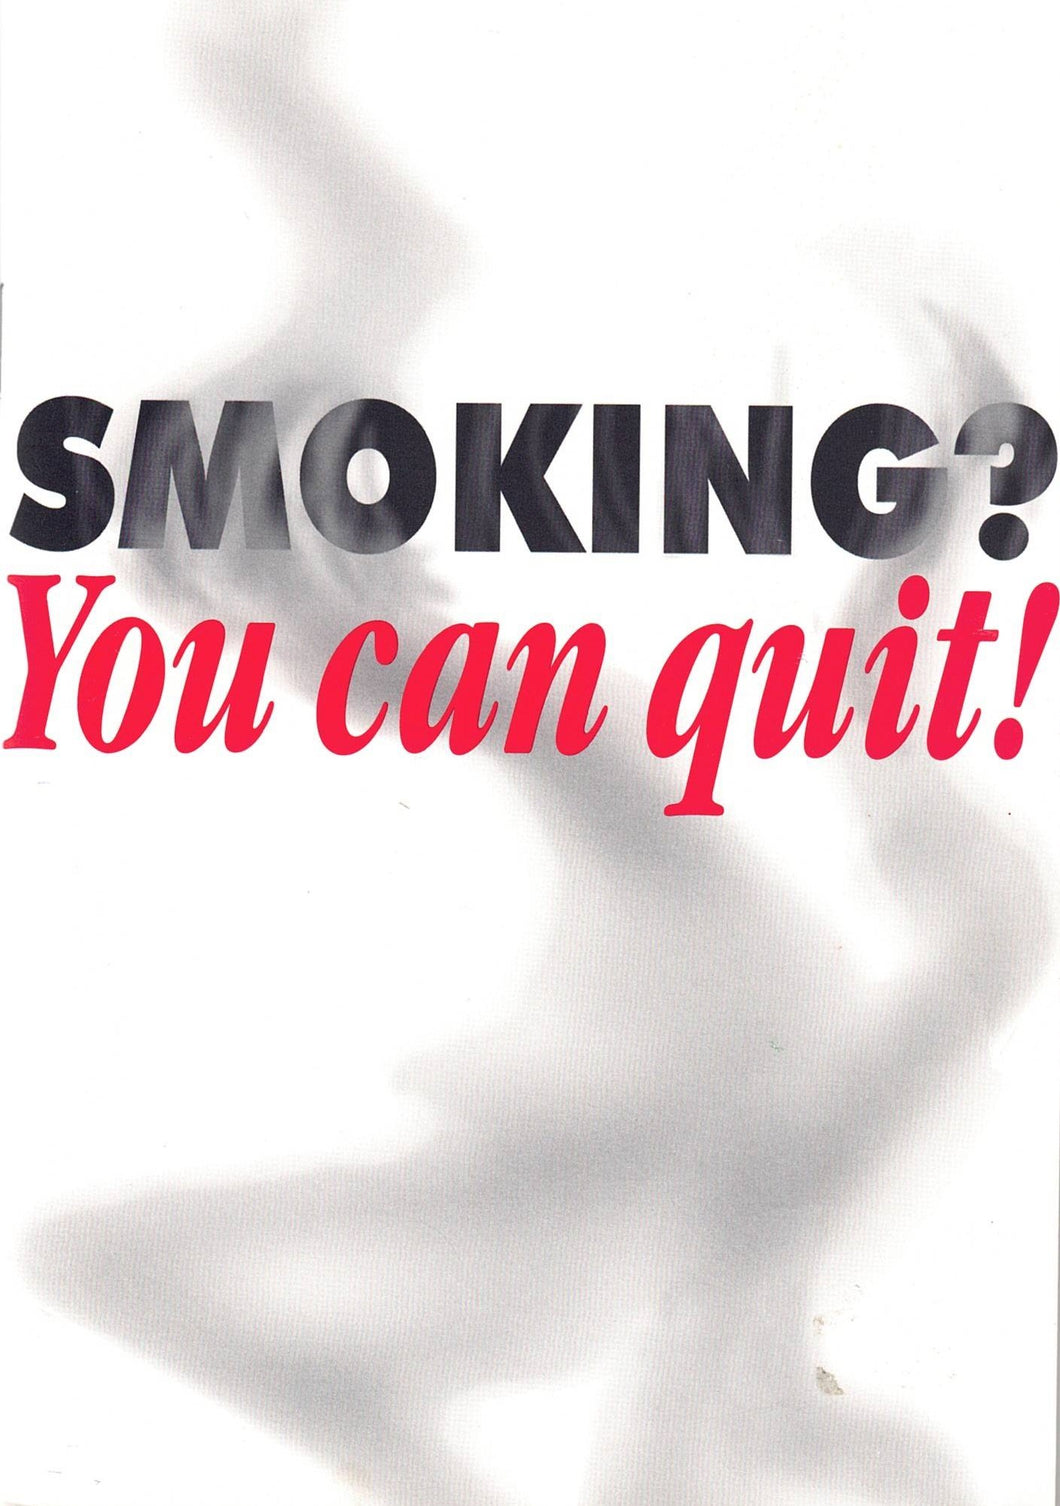 Smoking? You can quit!